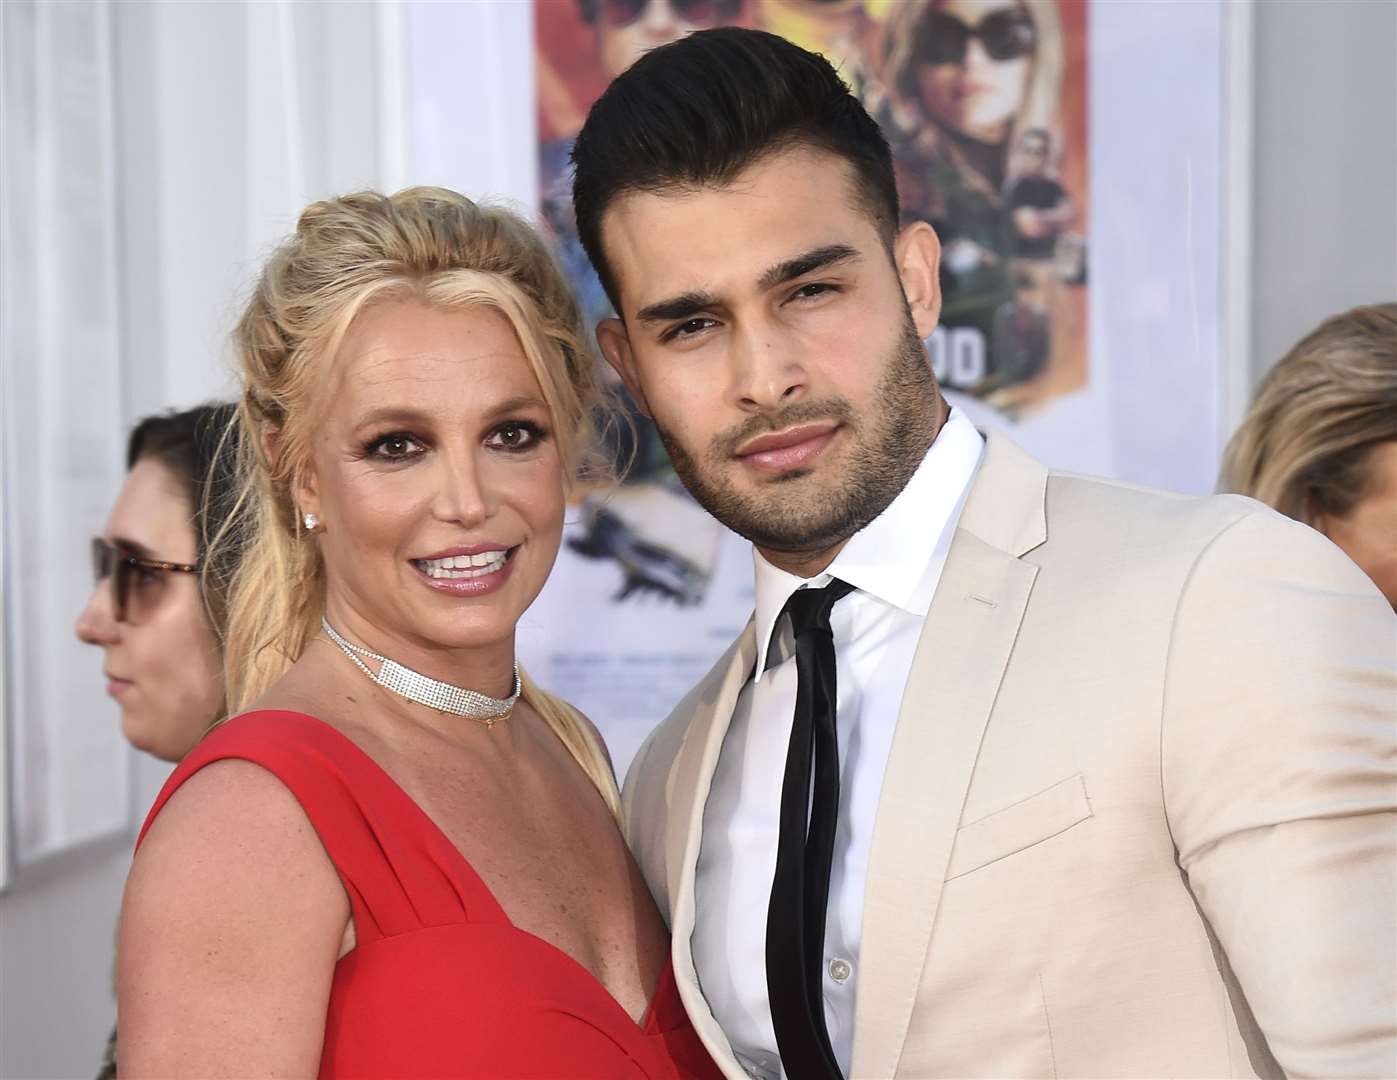 Alexander attempted to crash the wedding of Britney Spears and Sam Asghari (pictured) last Thursday (Jordan Strauss/AP)